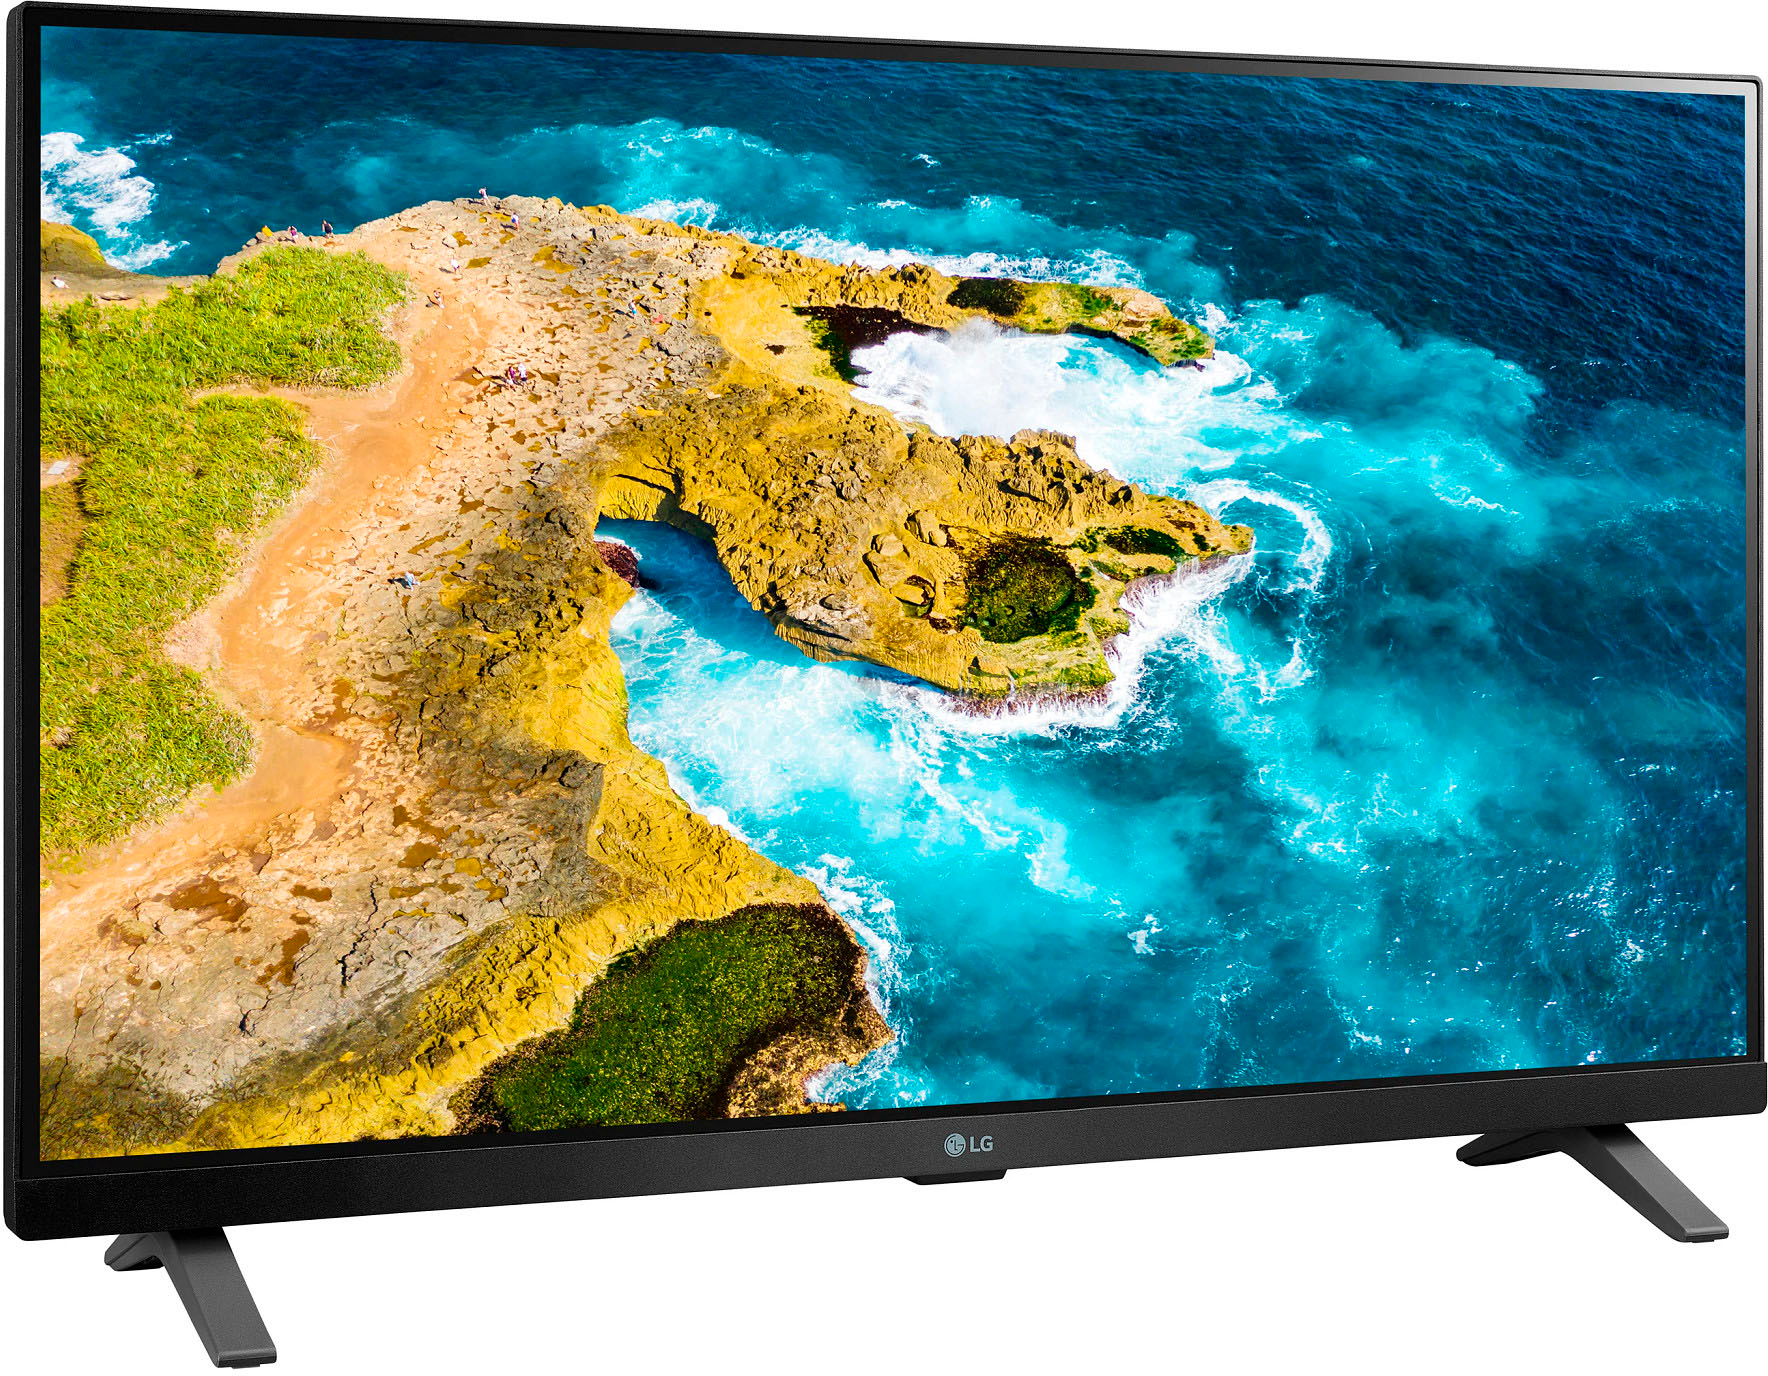 Left View: LG - 27" Class LED Full HD Smart TV with webOS